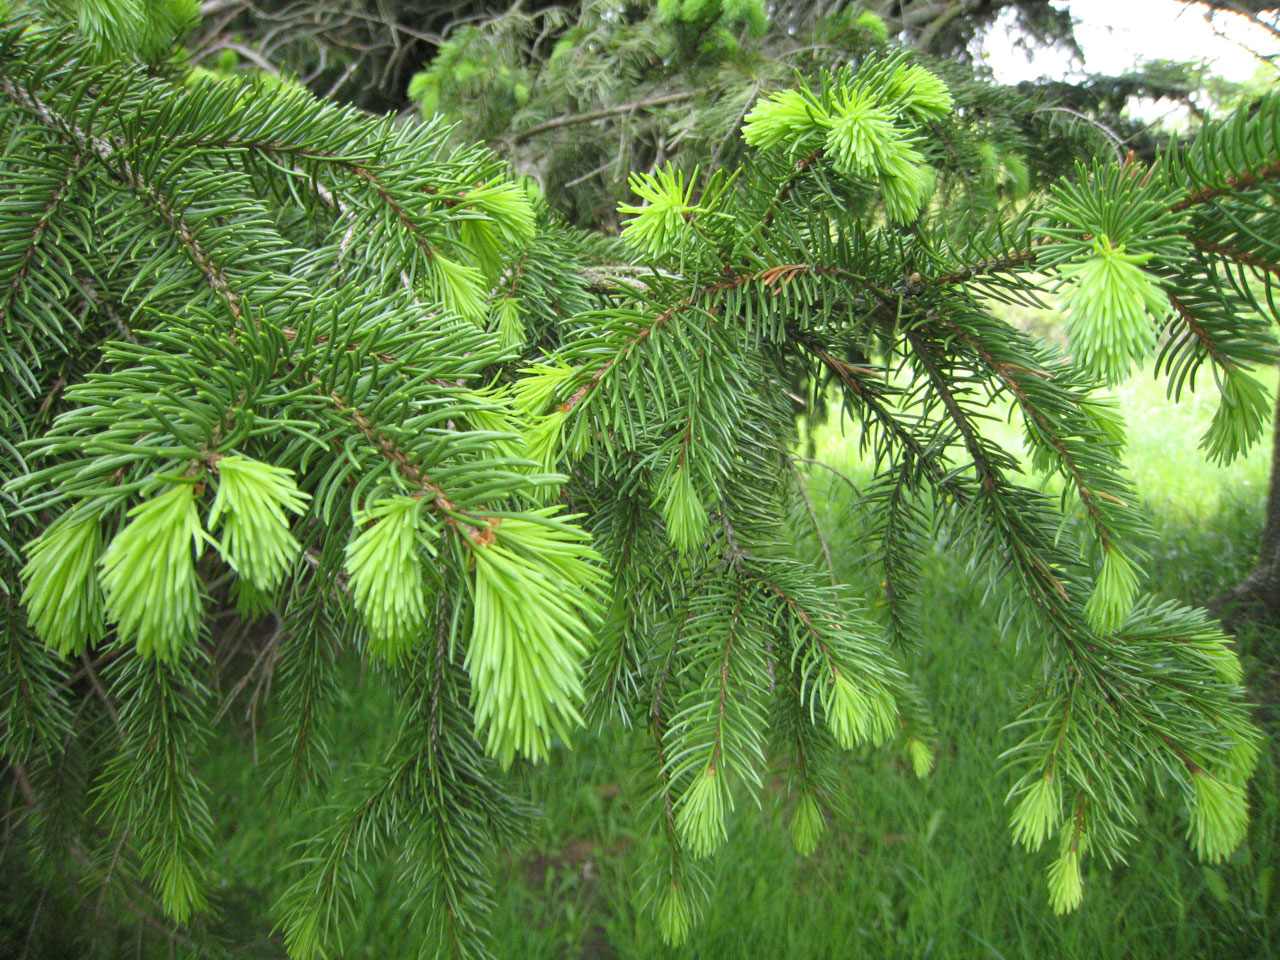 Pinetree in springtime with new growth